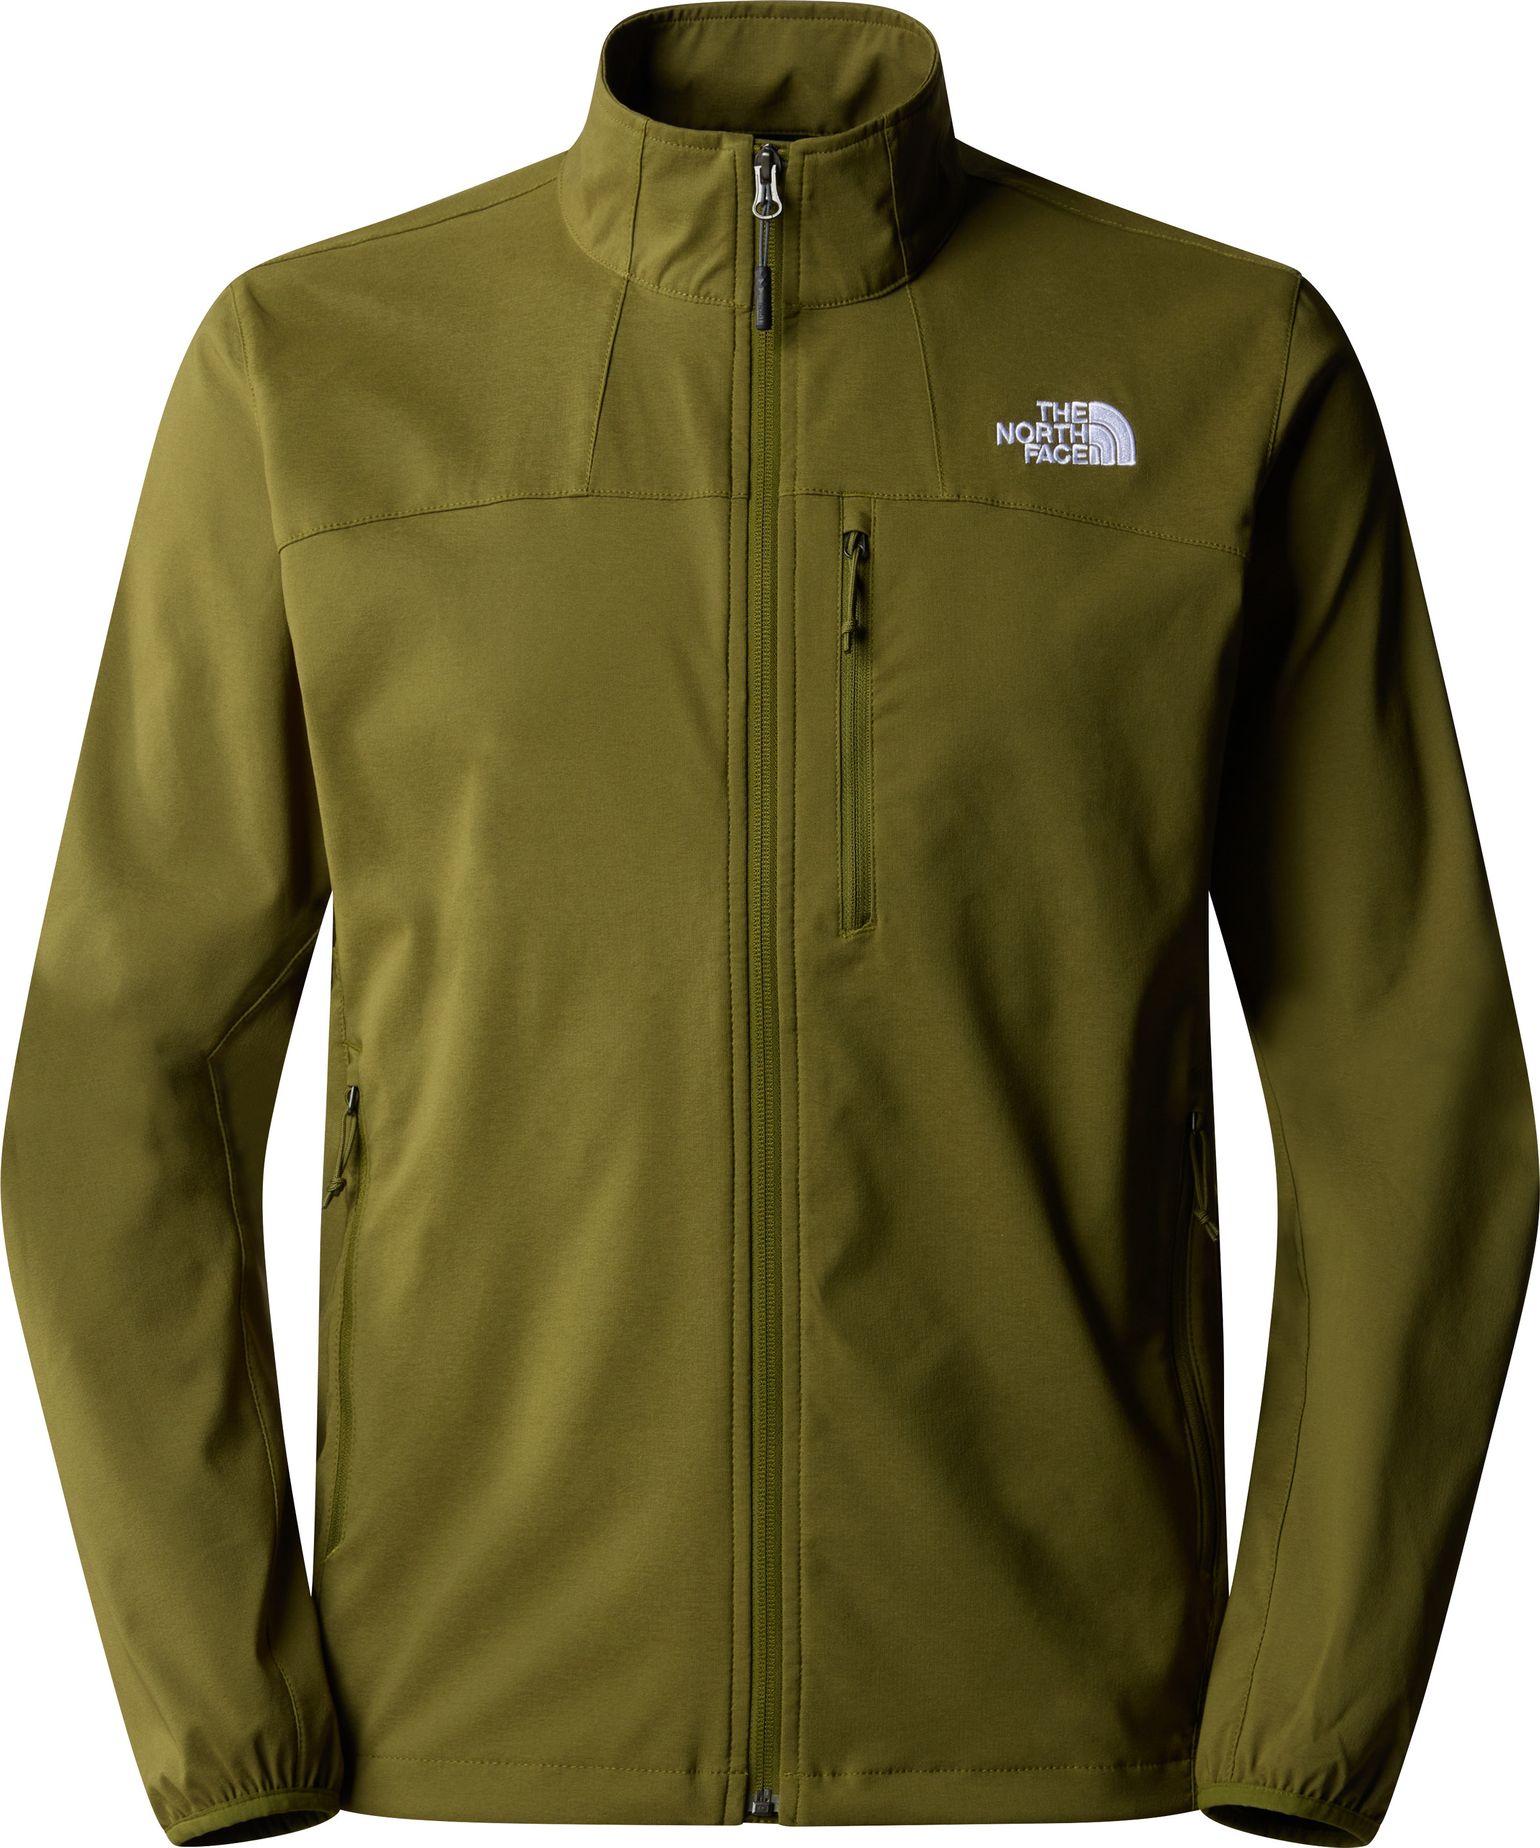 The North Face Men's Nimble Jacket Forest Olive